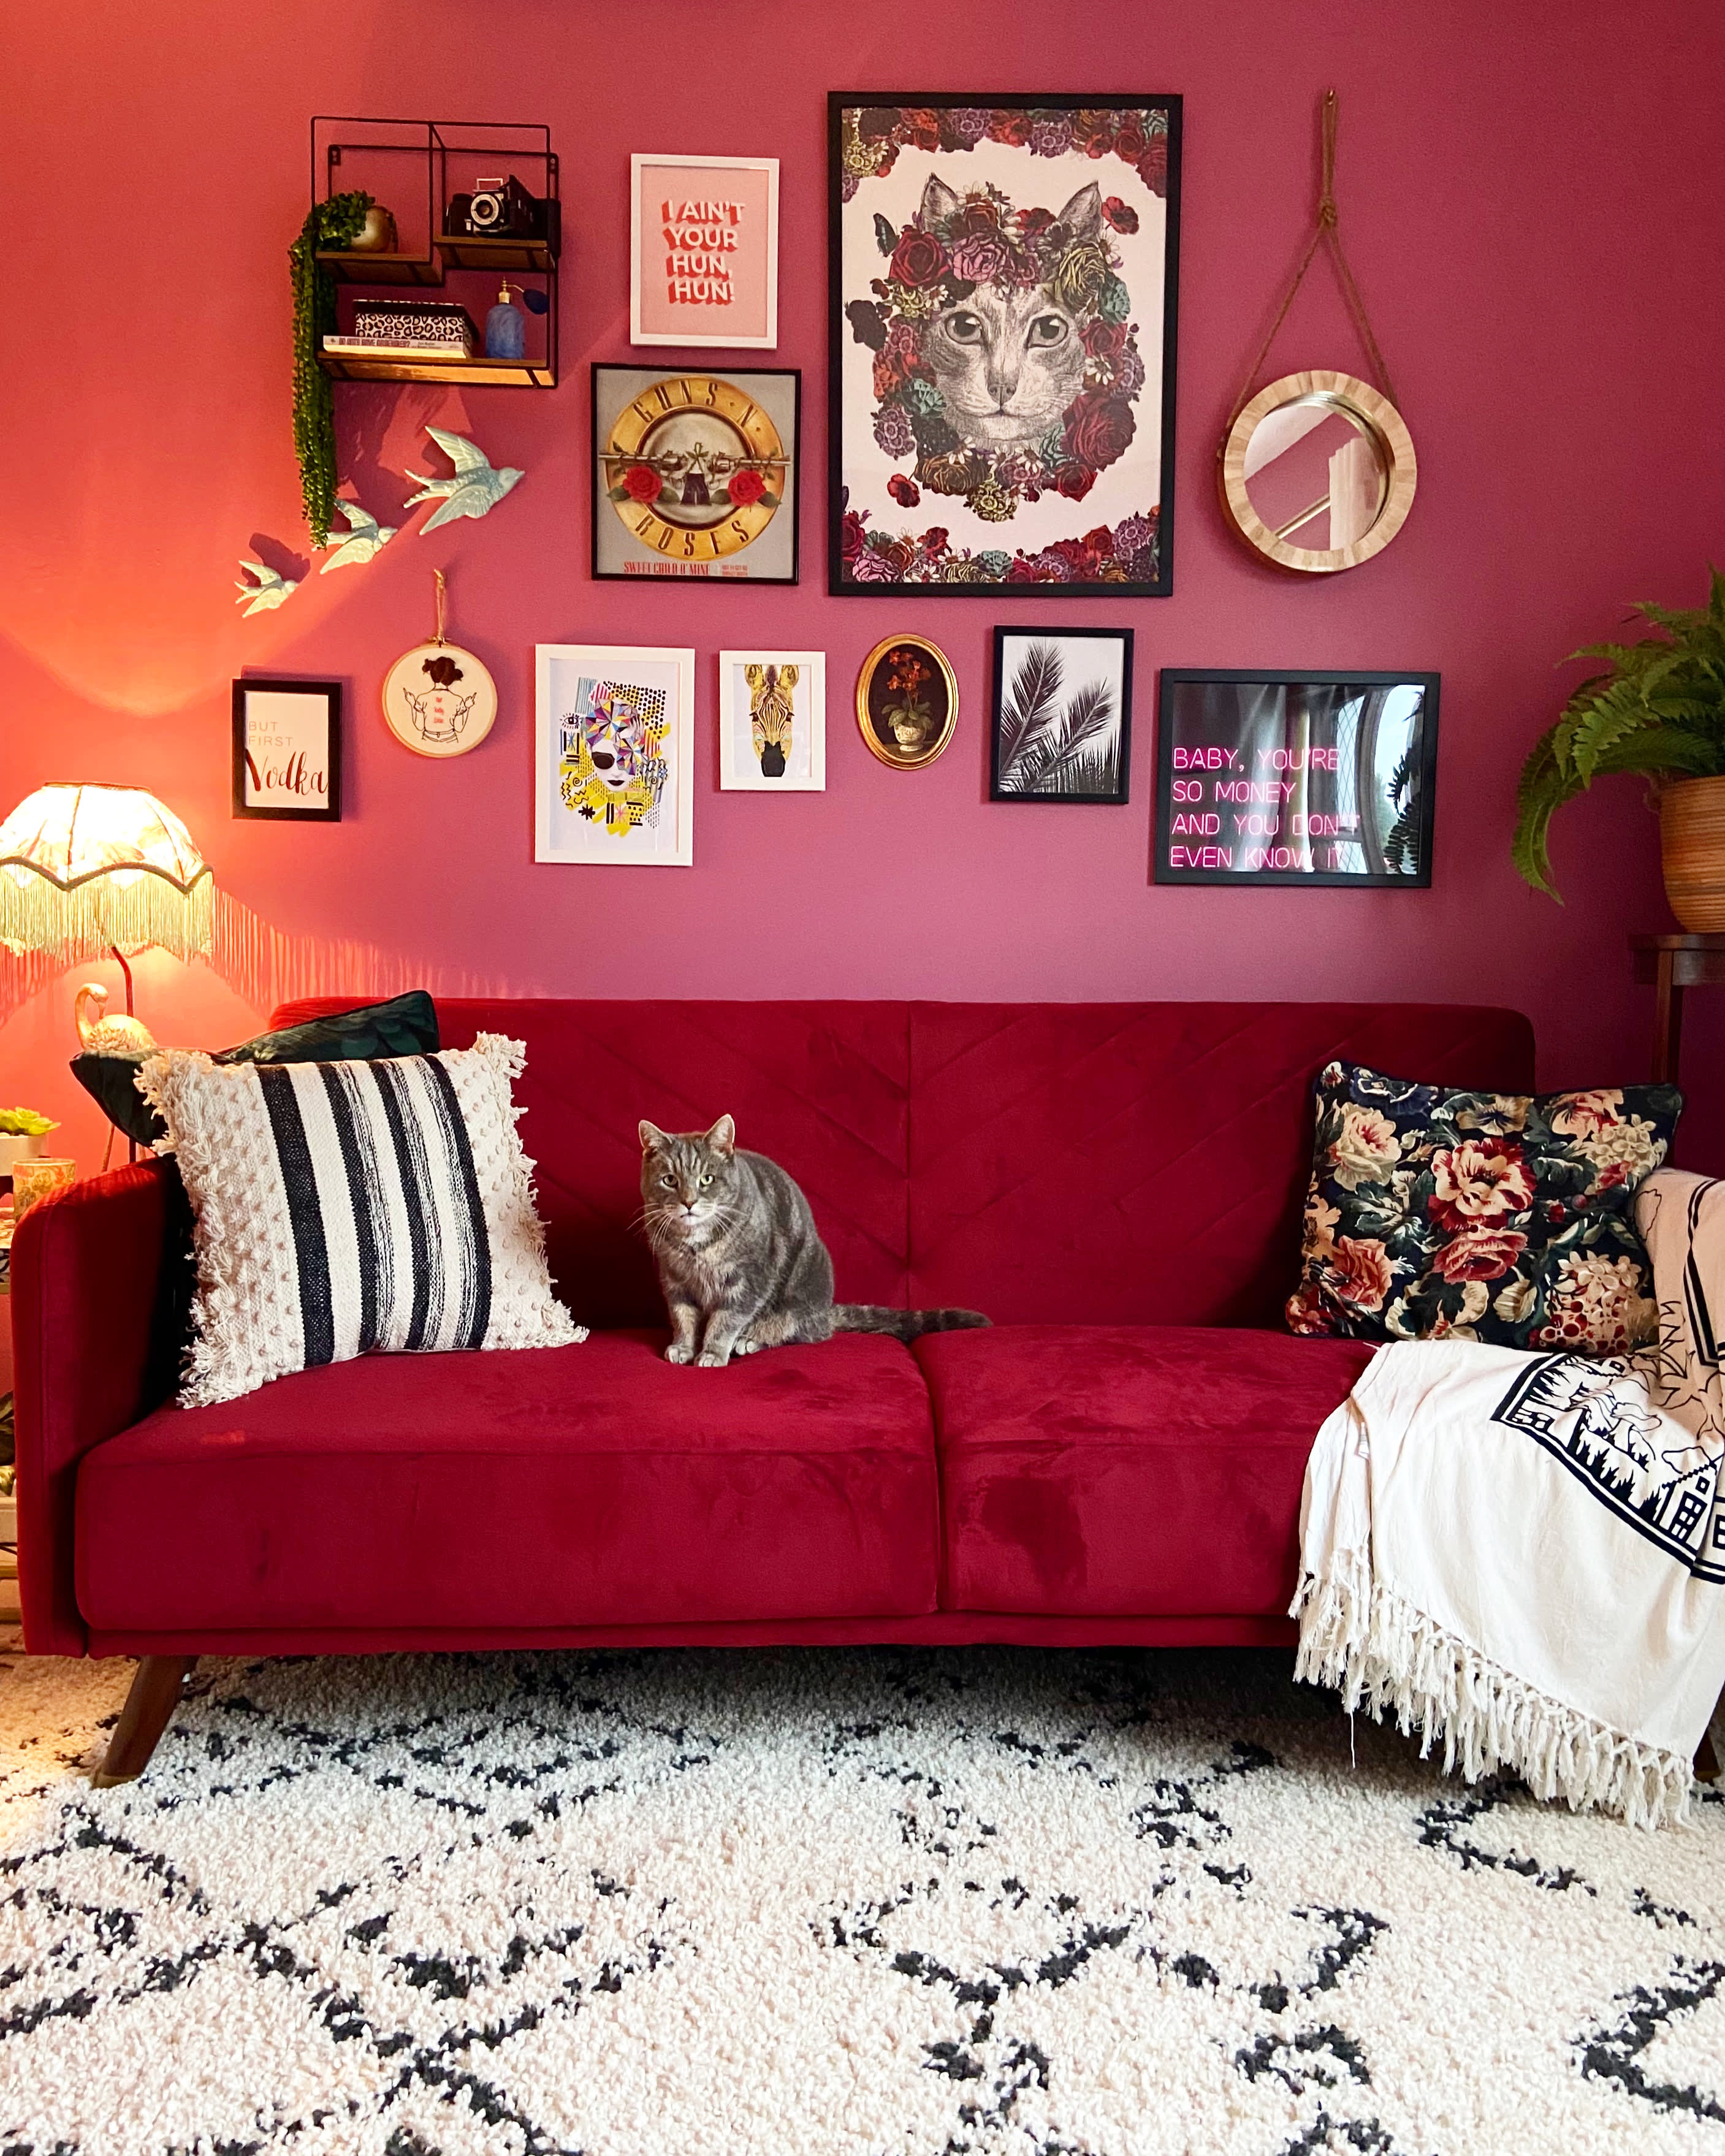 What Colors Go With Burgundy? Try These 12 Color Combos